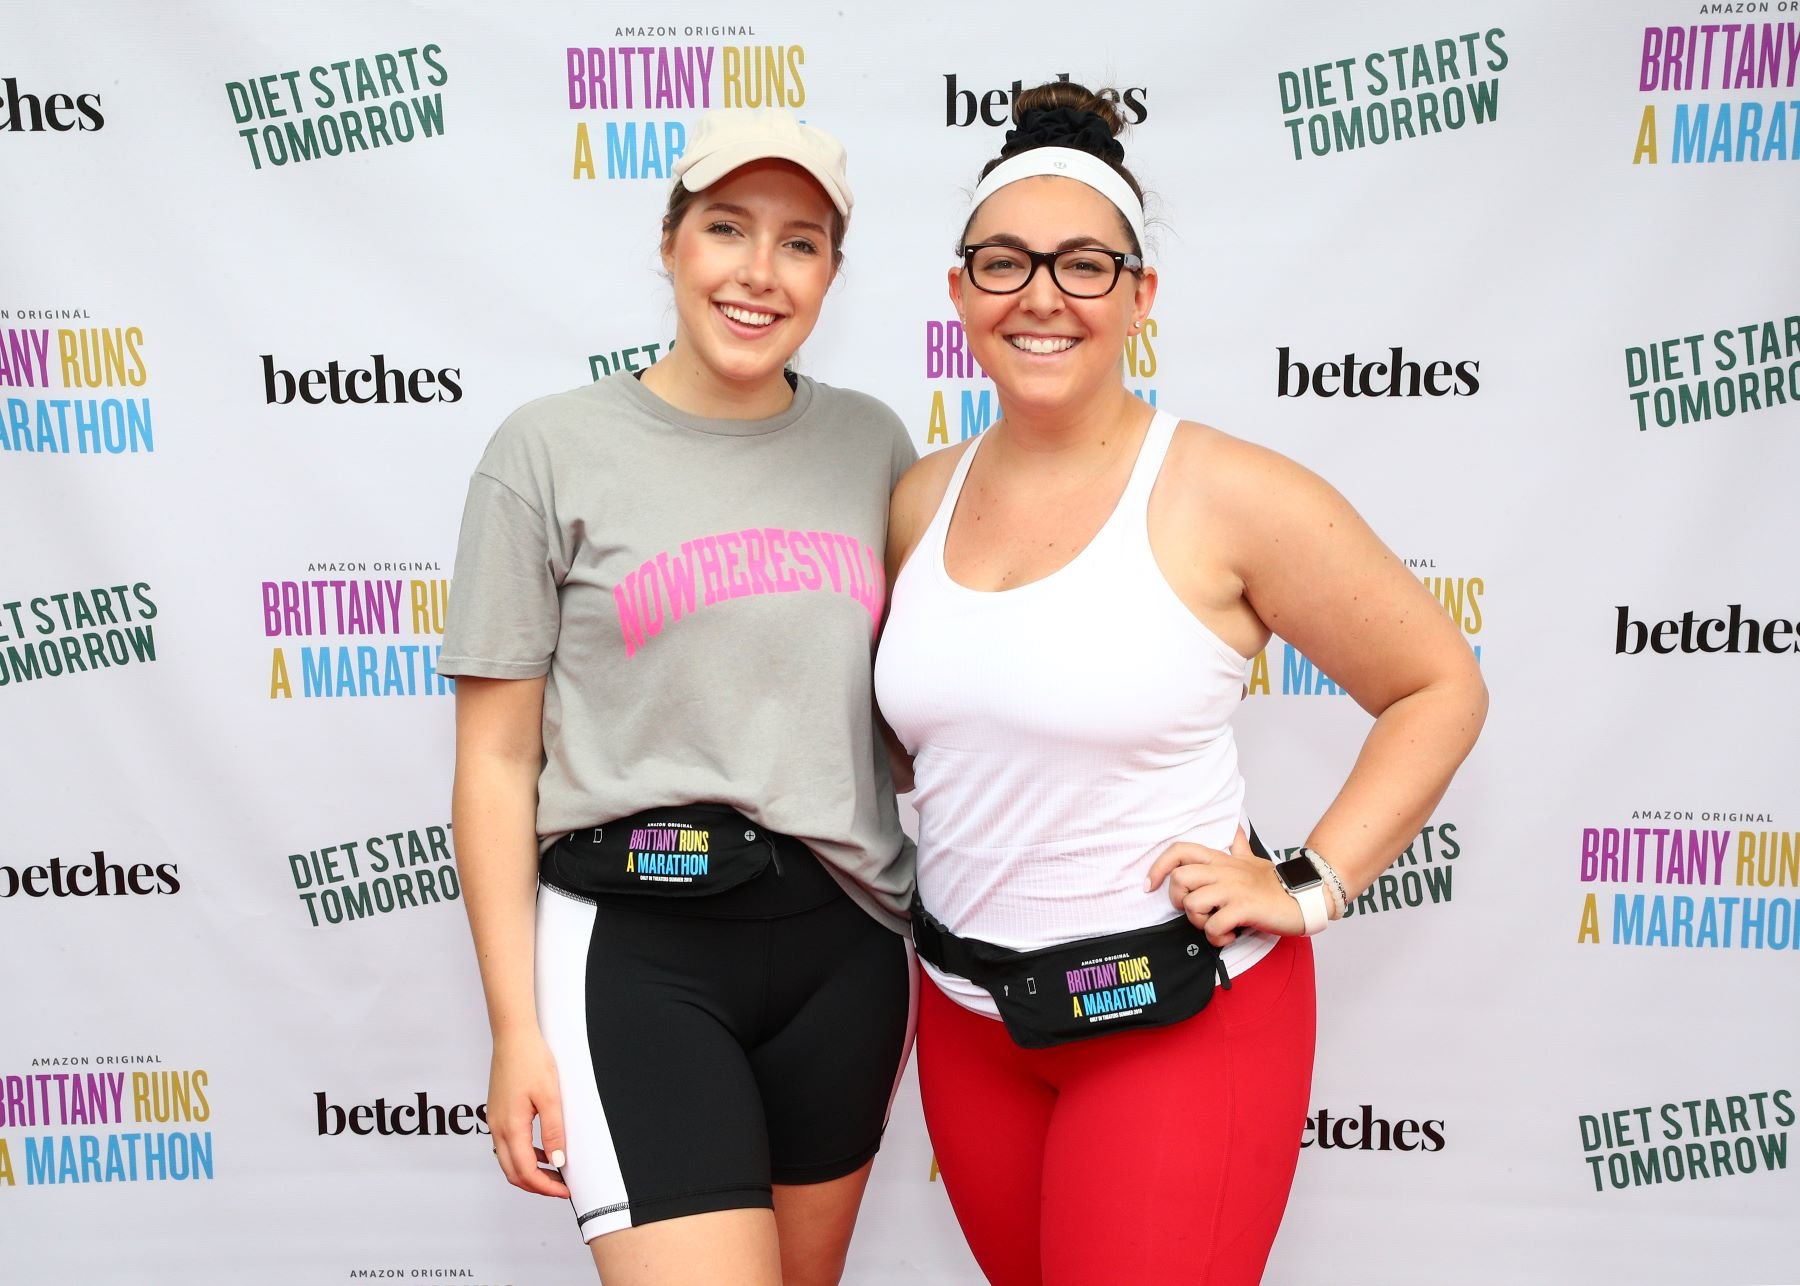 The 'Brittany Runs a Marathon' event 'Run to the Theater' presented by Amazon Studios and Betches Media